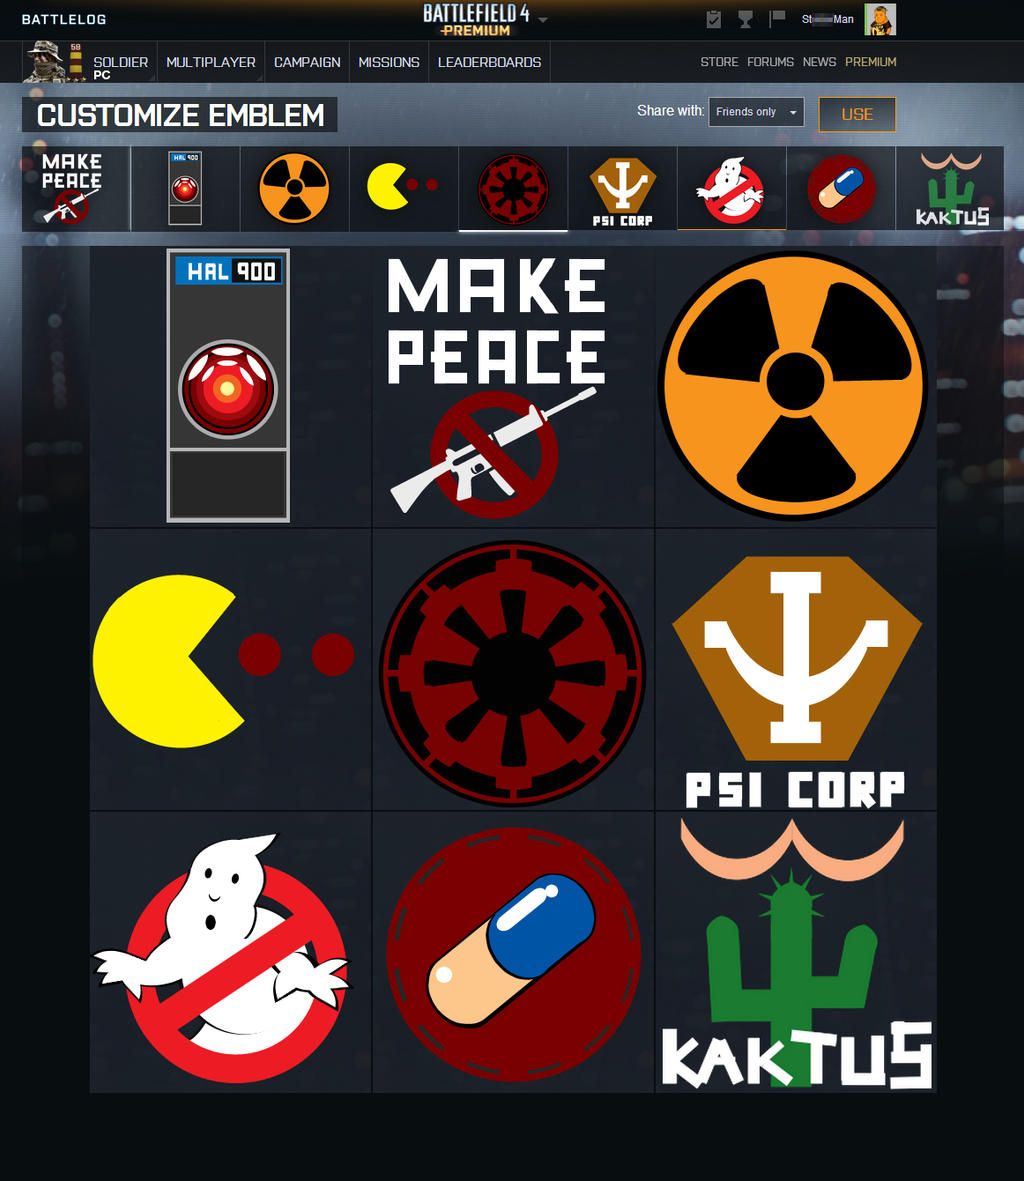 How to import custom emblems to Battlefield 4 in 2021 